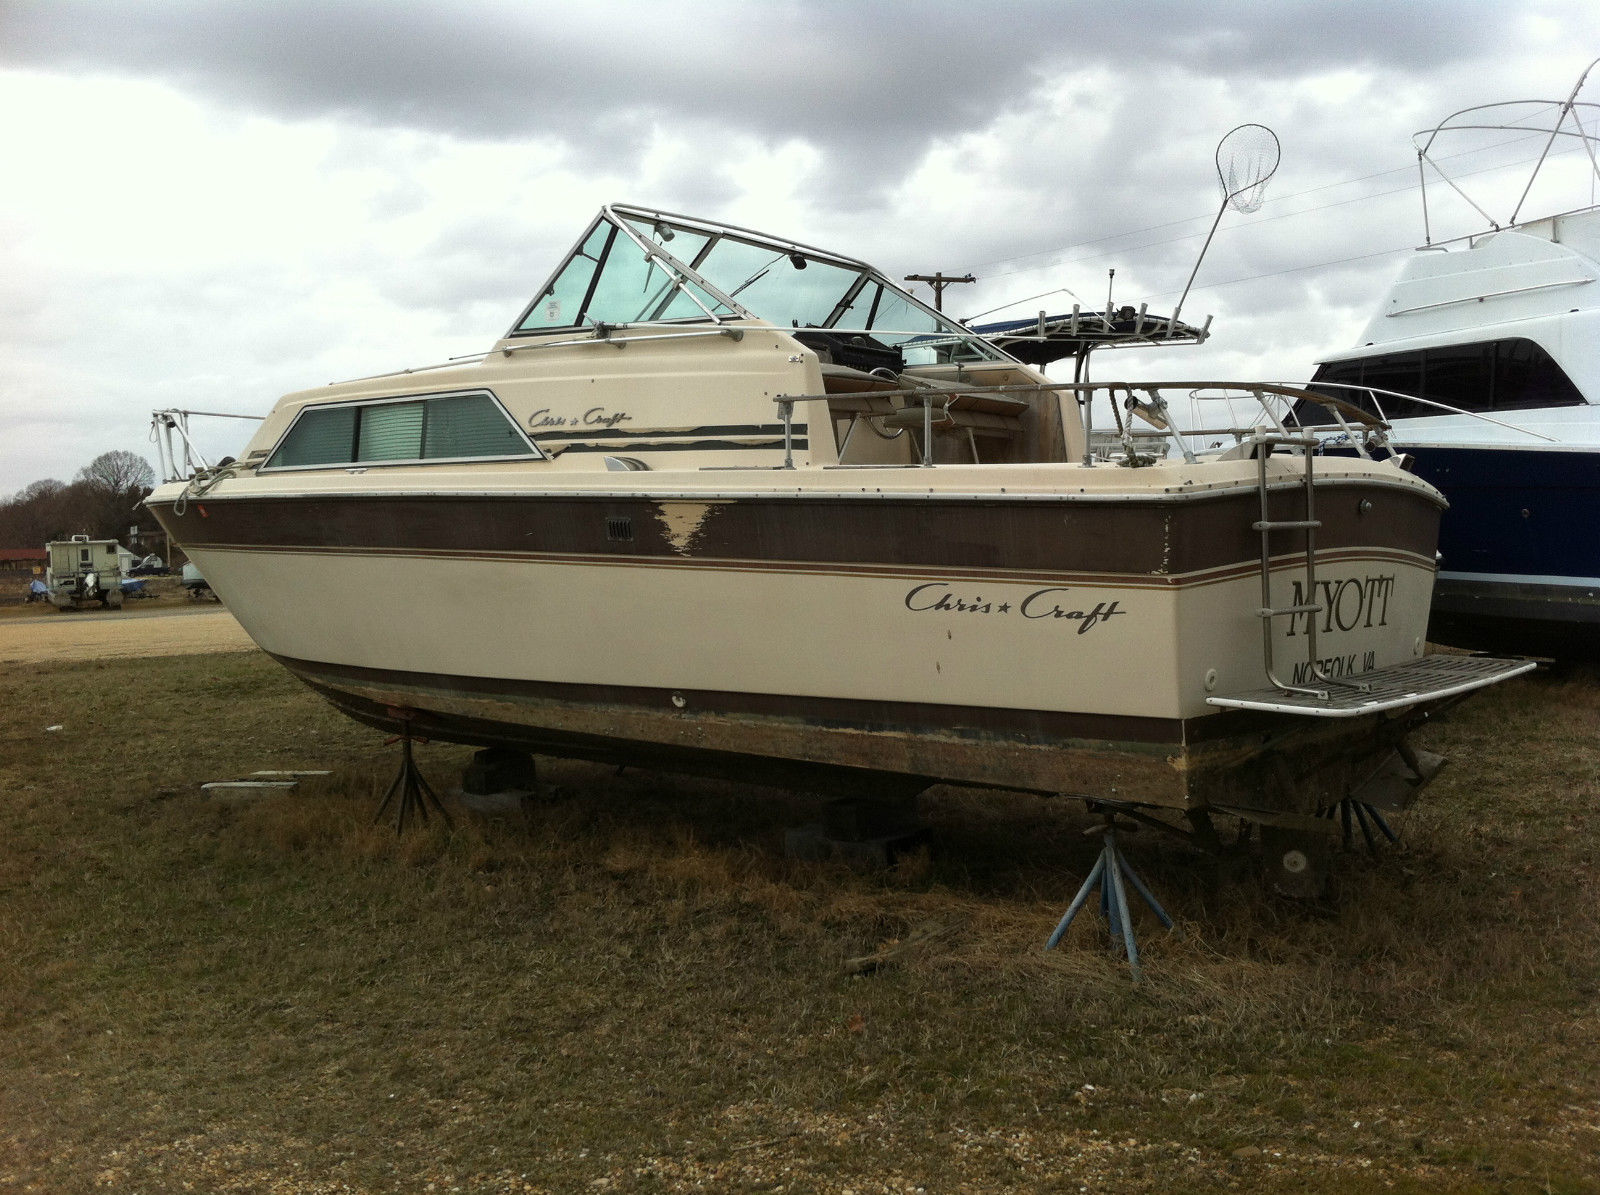 Chris Craft Express Cruiser 1982 for sale for $1,200 ...